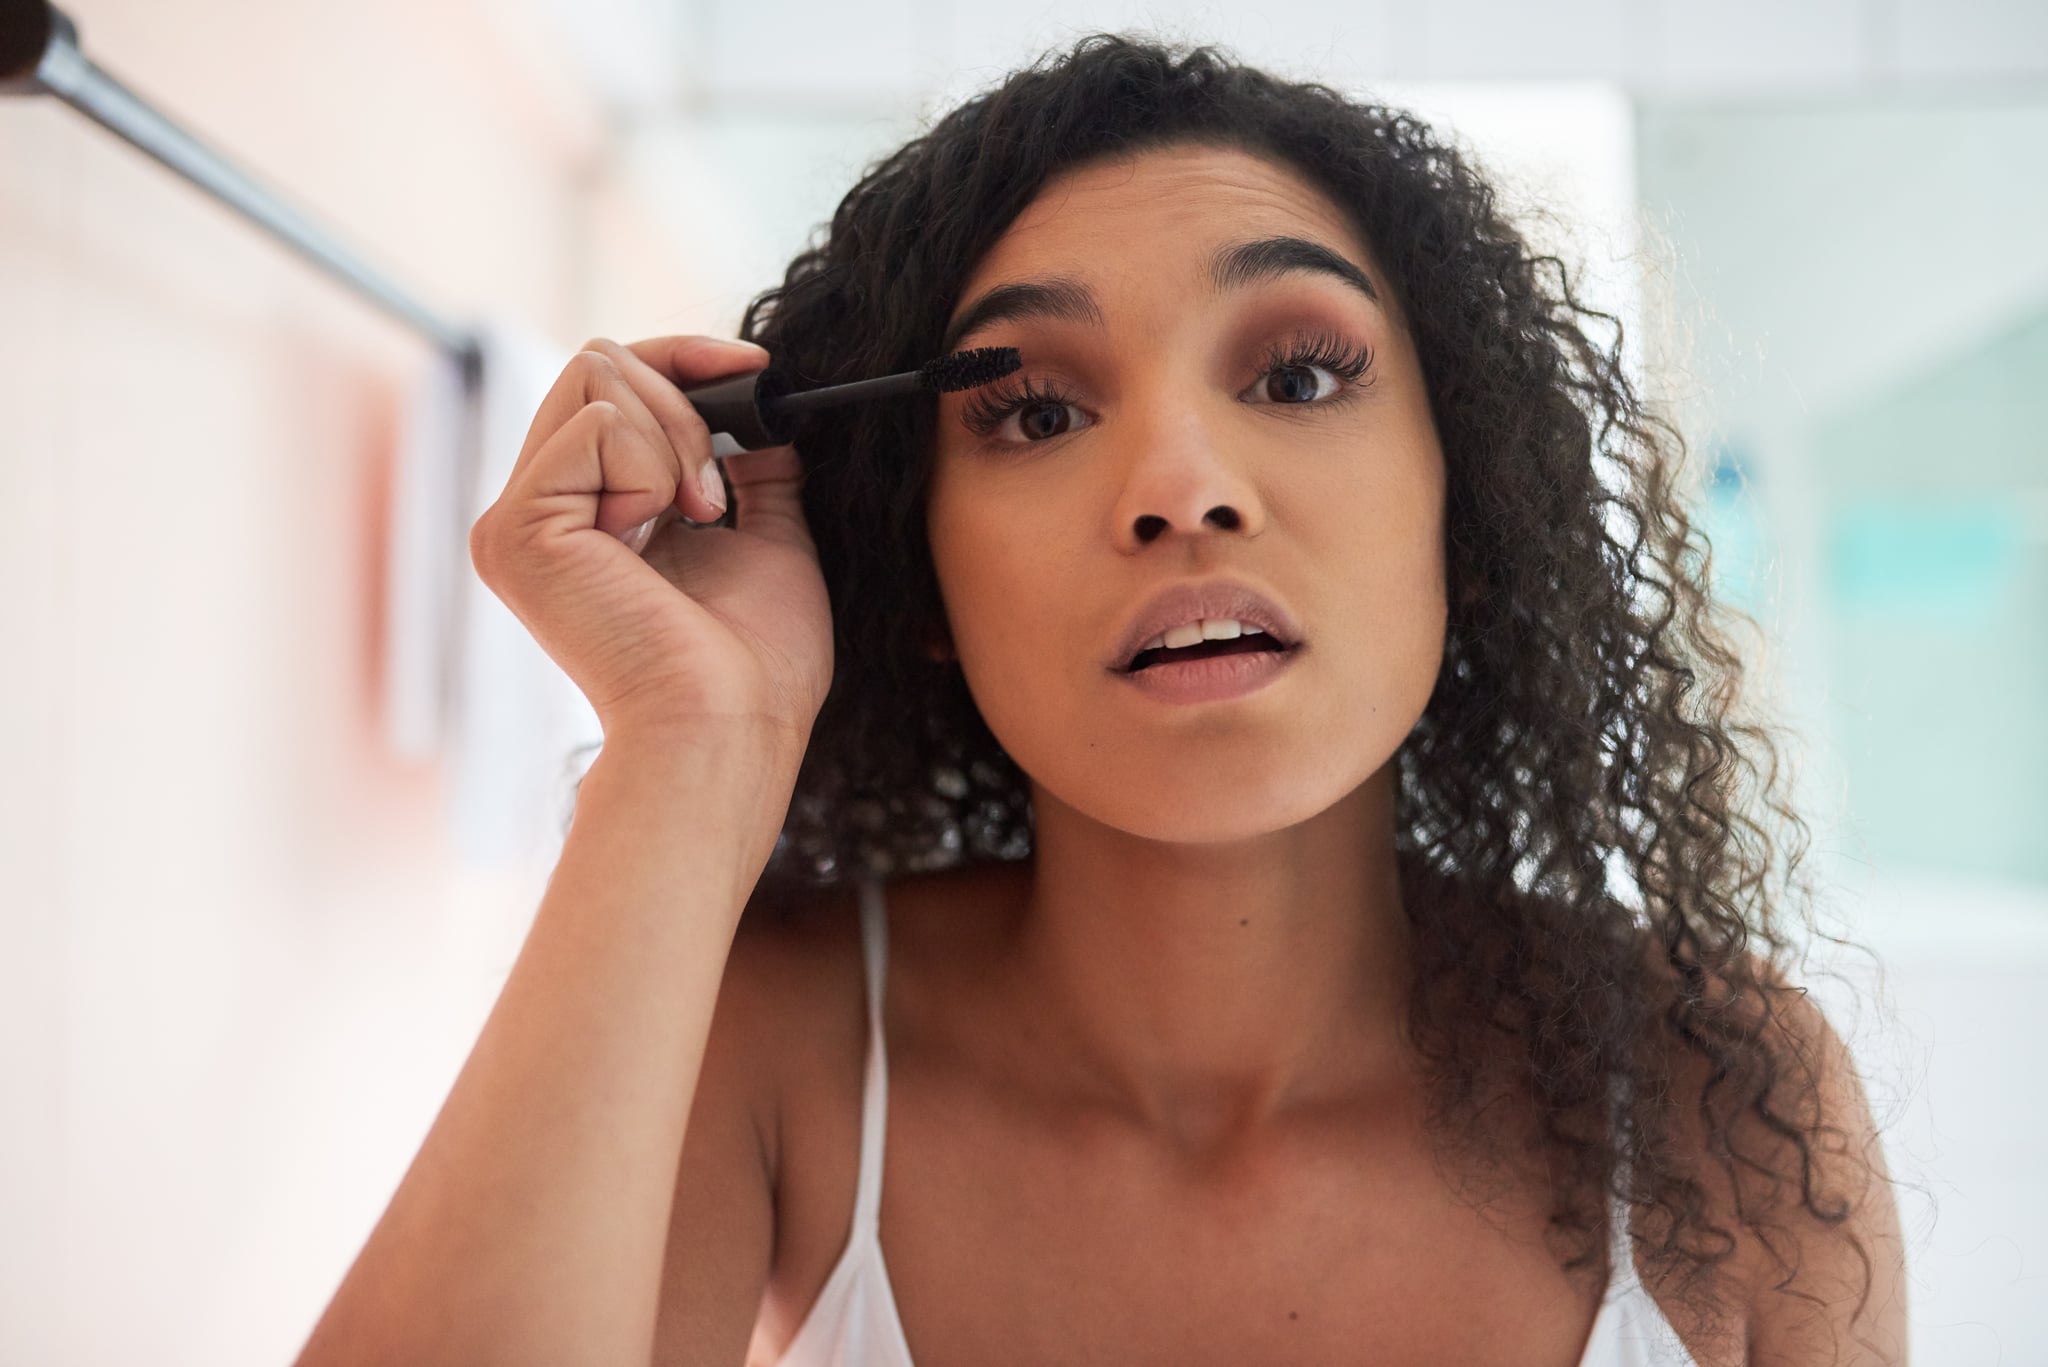 Portrait of an attractive young woman applying mascara in the bathroom